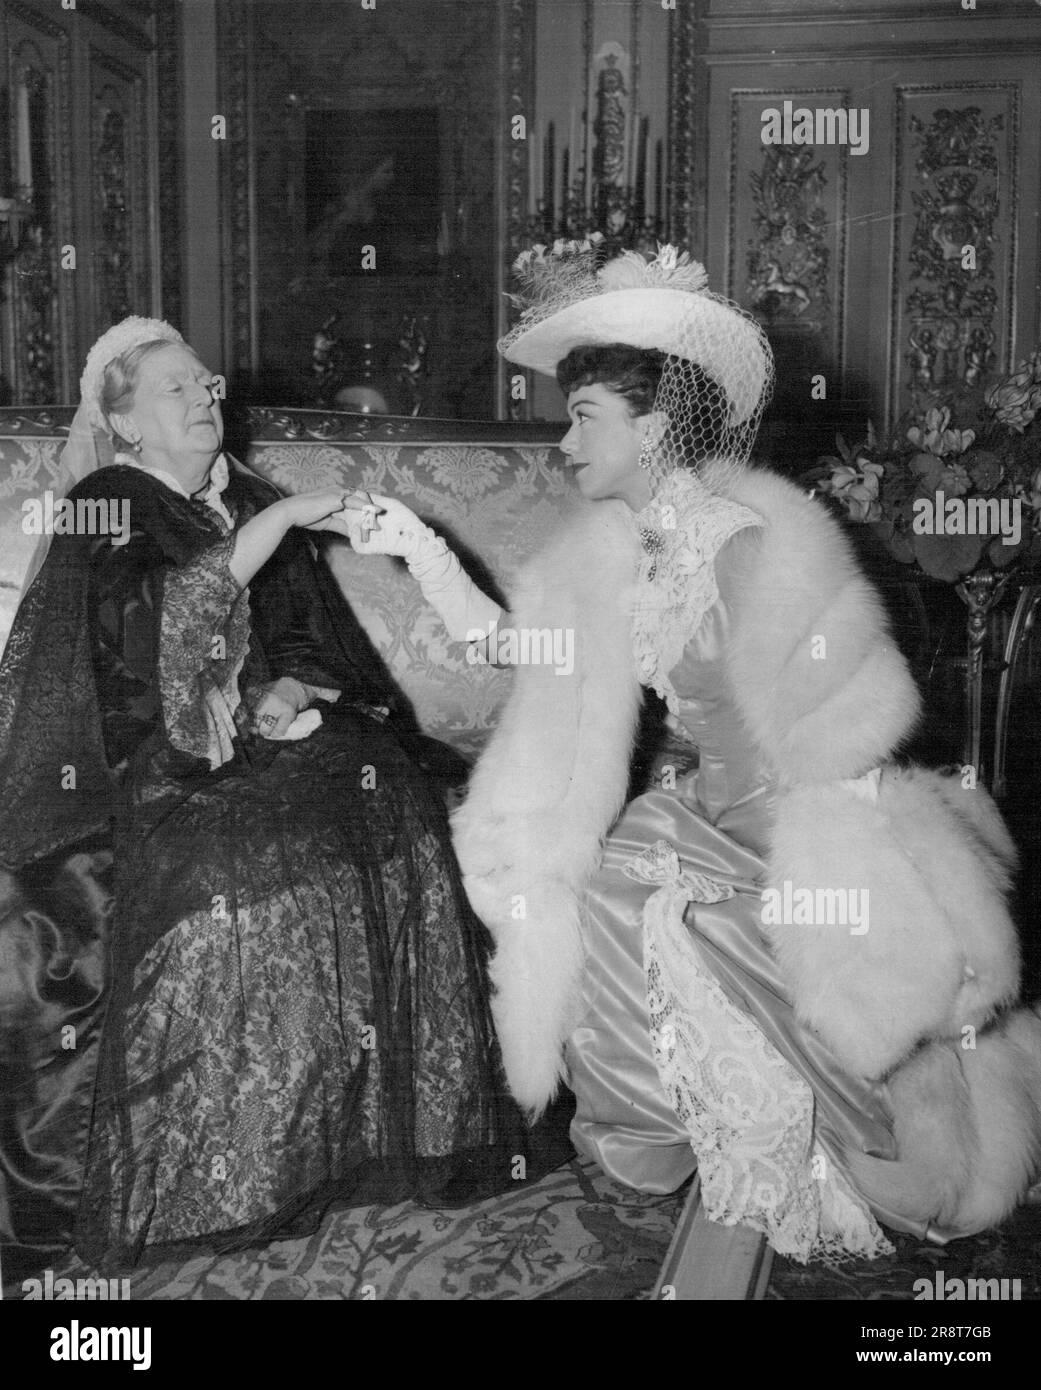 'Queen Victoria Receives Melba' Queen Victoria, played by Dame Sybil Thorndike, receives Dame Nellie Melba, the world famous soprano, played and sung by Patrice Munsel, in the Red Drawing Room at Windsor Castle. This scene from the British colour film 'Melba' was made at the Nettlefold Studios, Walton-on-Thames, Surrey. For the scene, a replica of the red drawing room was built in the studios from details given by Librarian at Windsor Castle. Dame Sybil Thorndike is the sixth actress to play the part of the historic 'old queen'- the others have been Pamela Stanely, Anna Neagle, Irene Dunn… Stock Photo